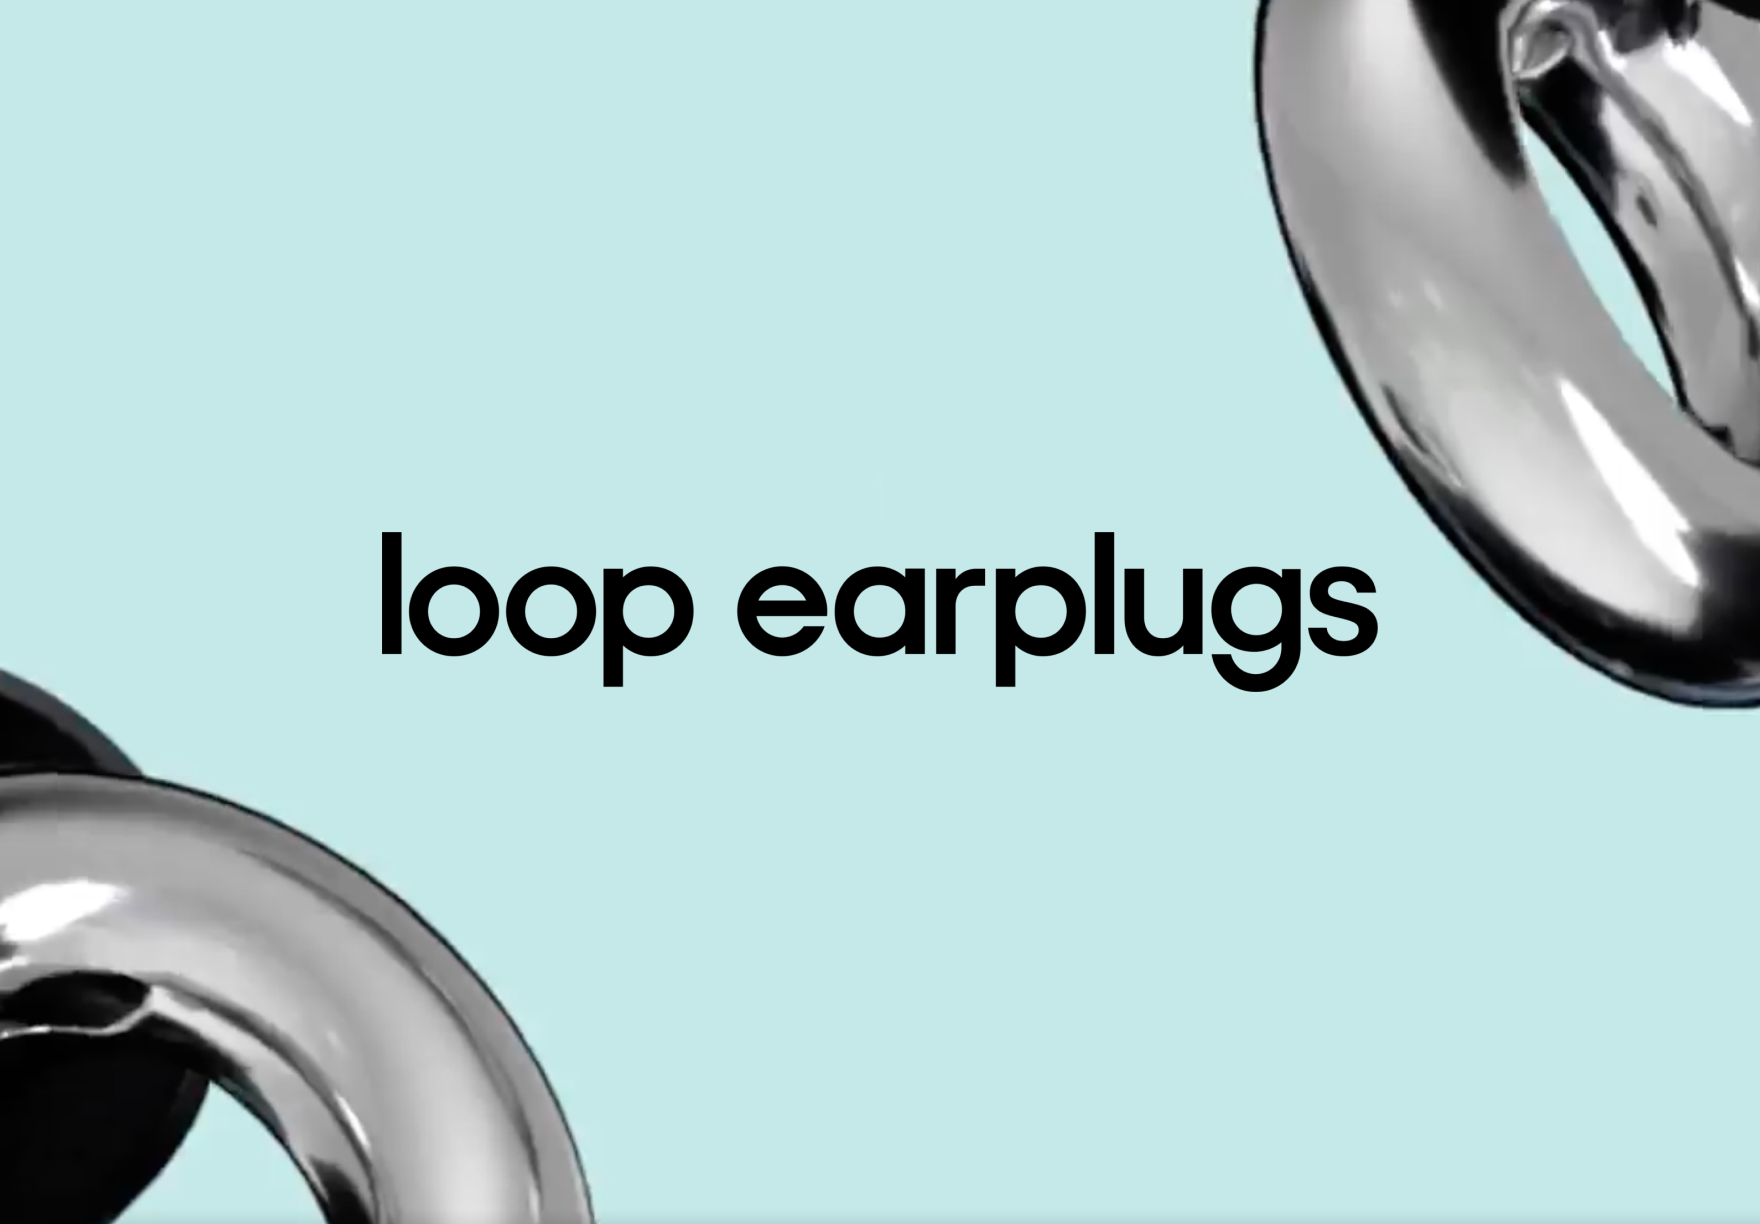 Loop Earplugs' Approach To Securing the #1 Ranking in Their Industry